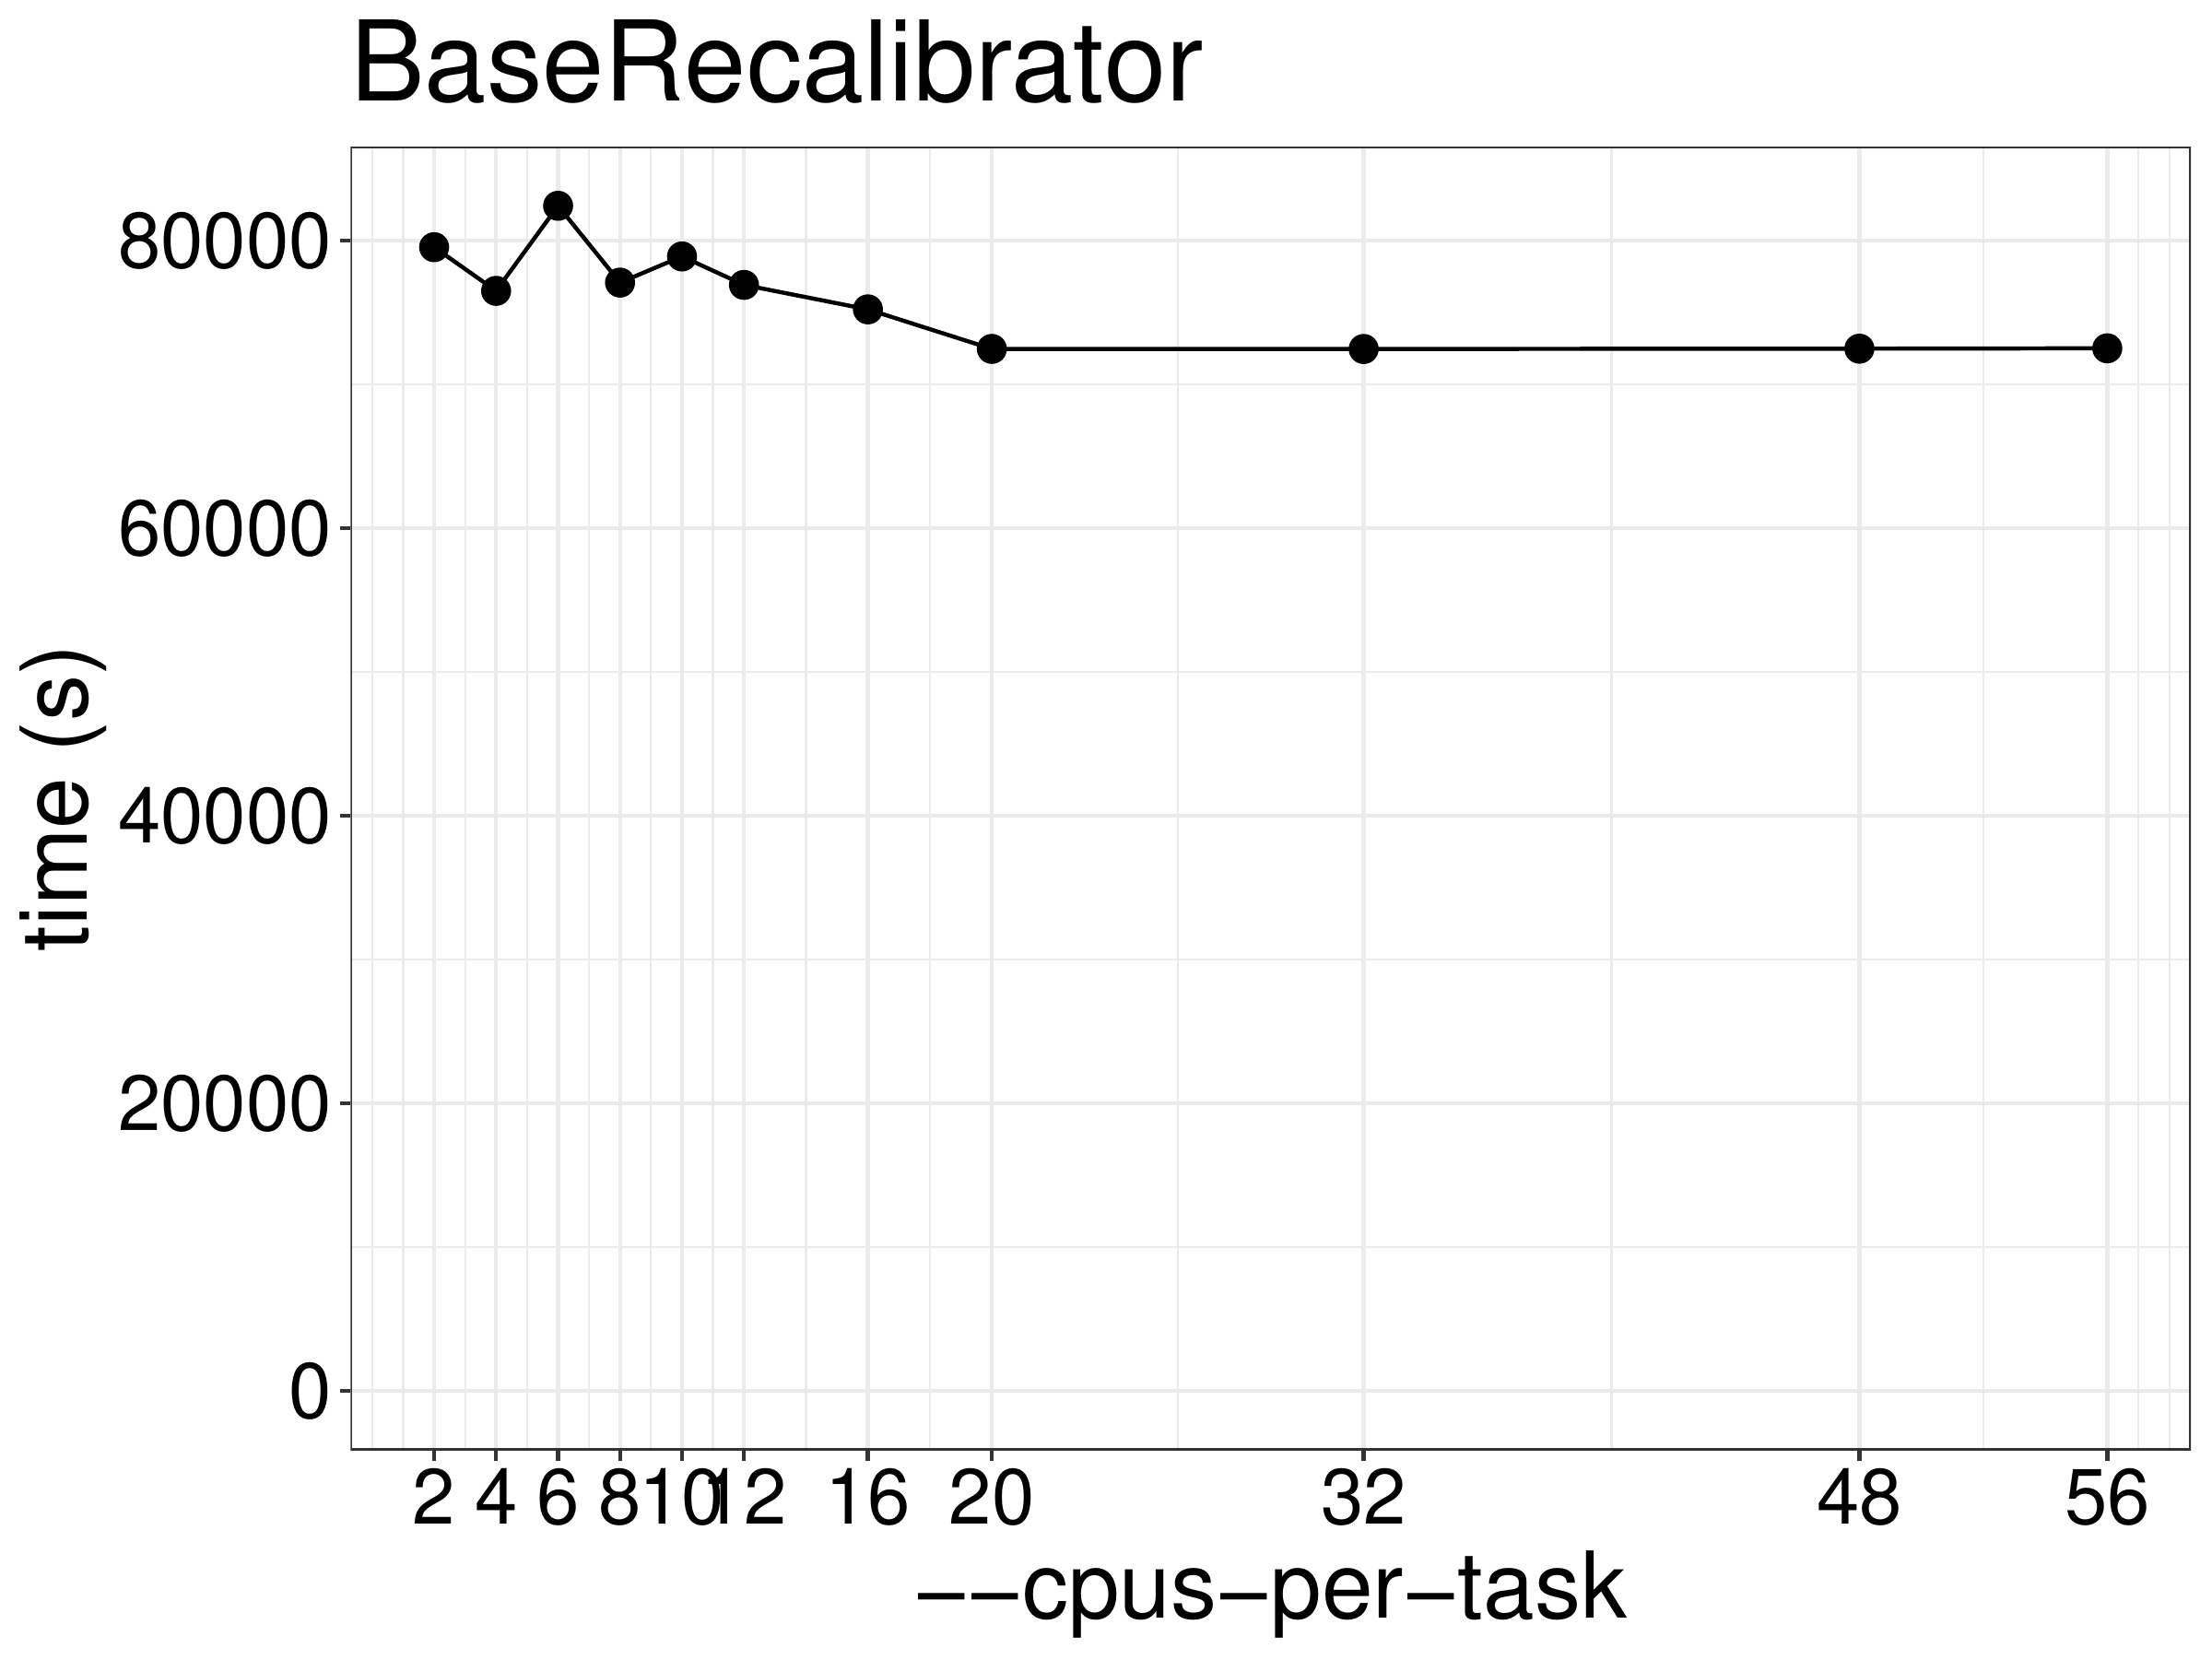 BaseRecalibrator runtime as a function of the number of threads.